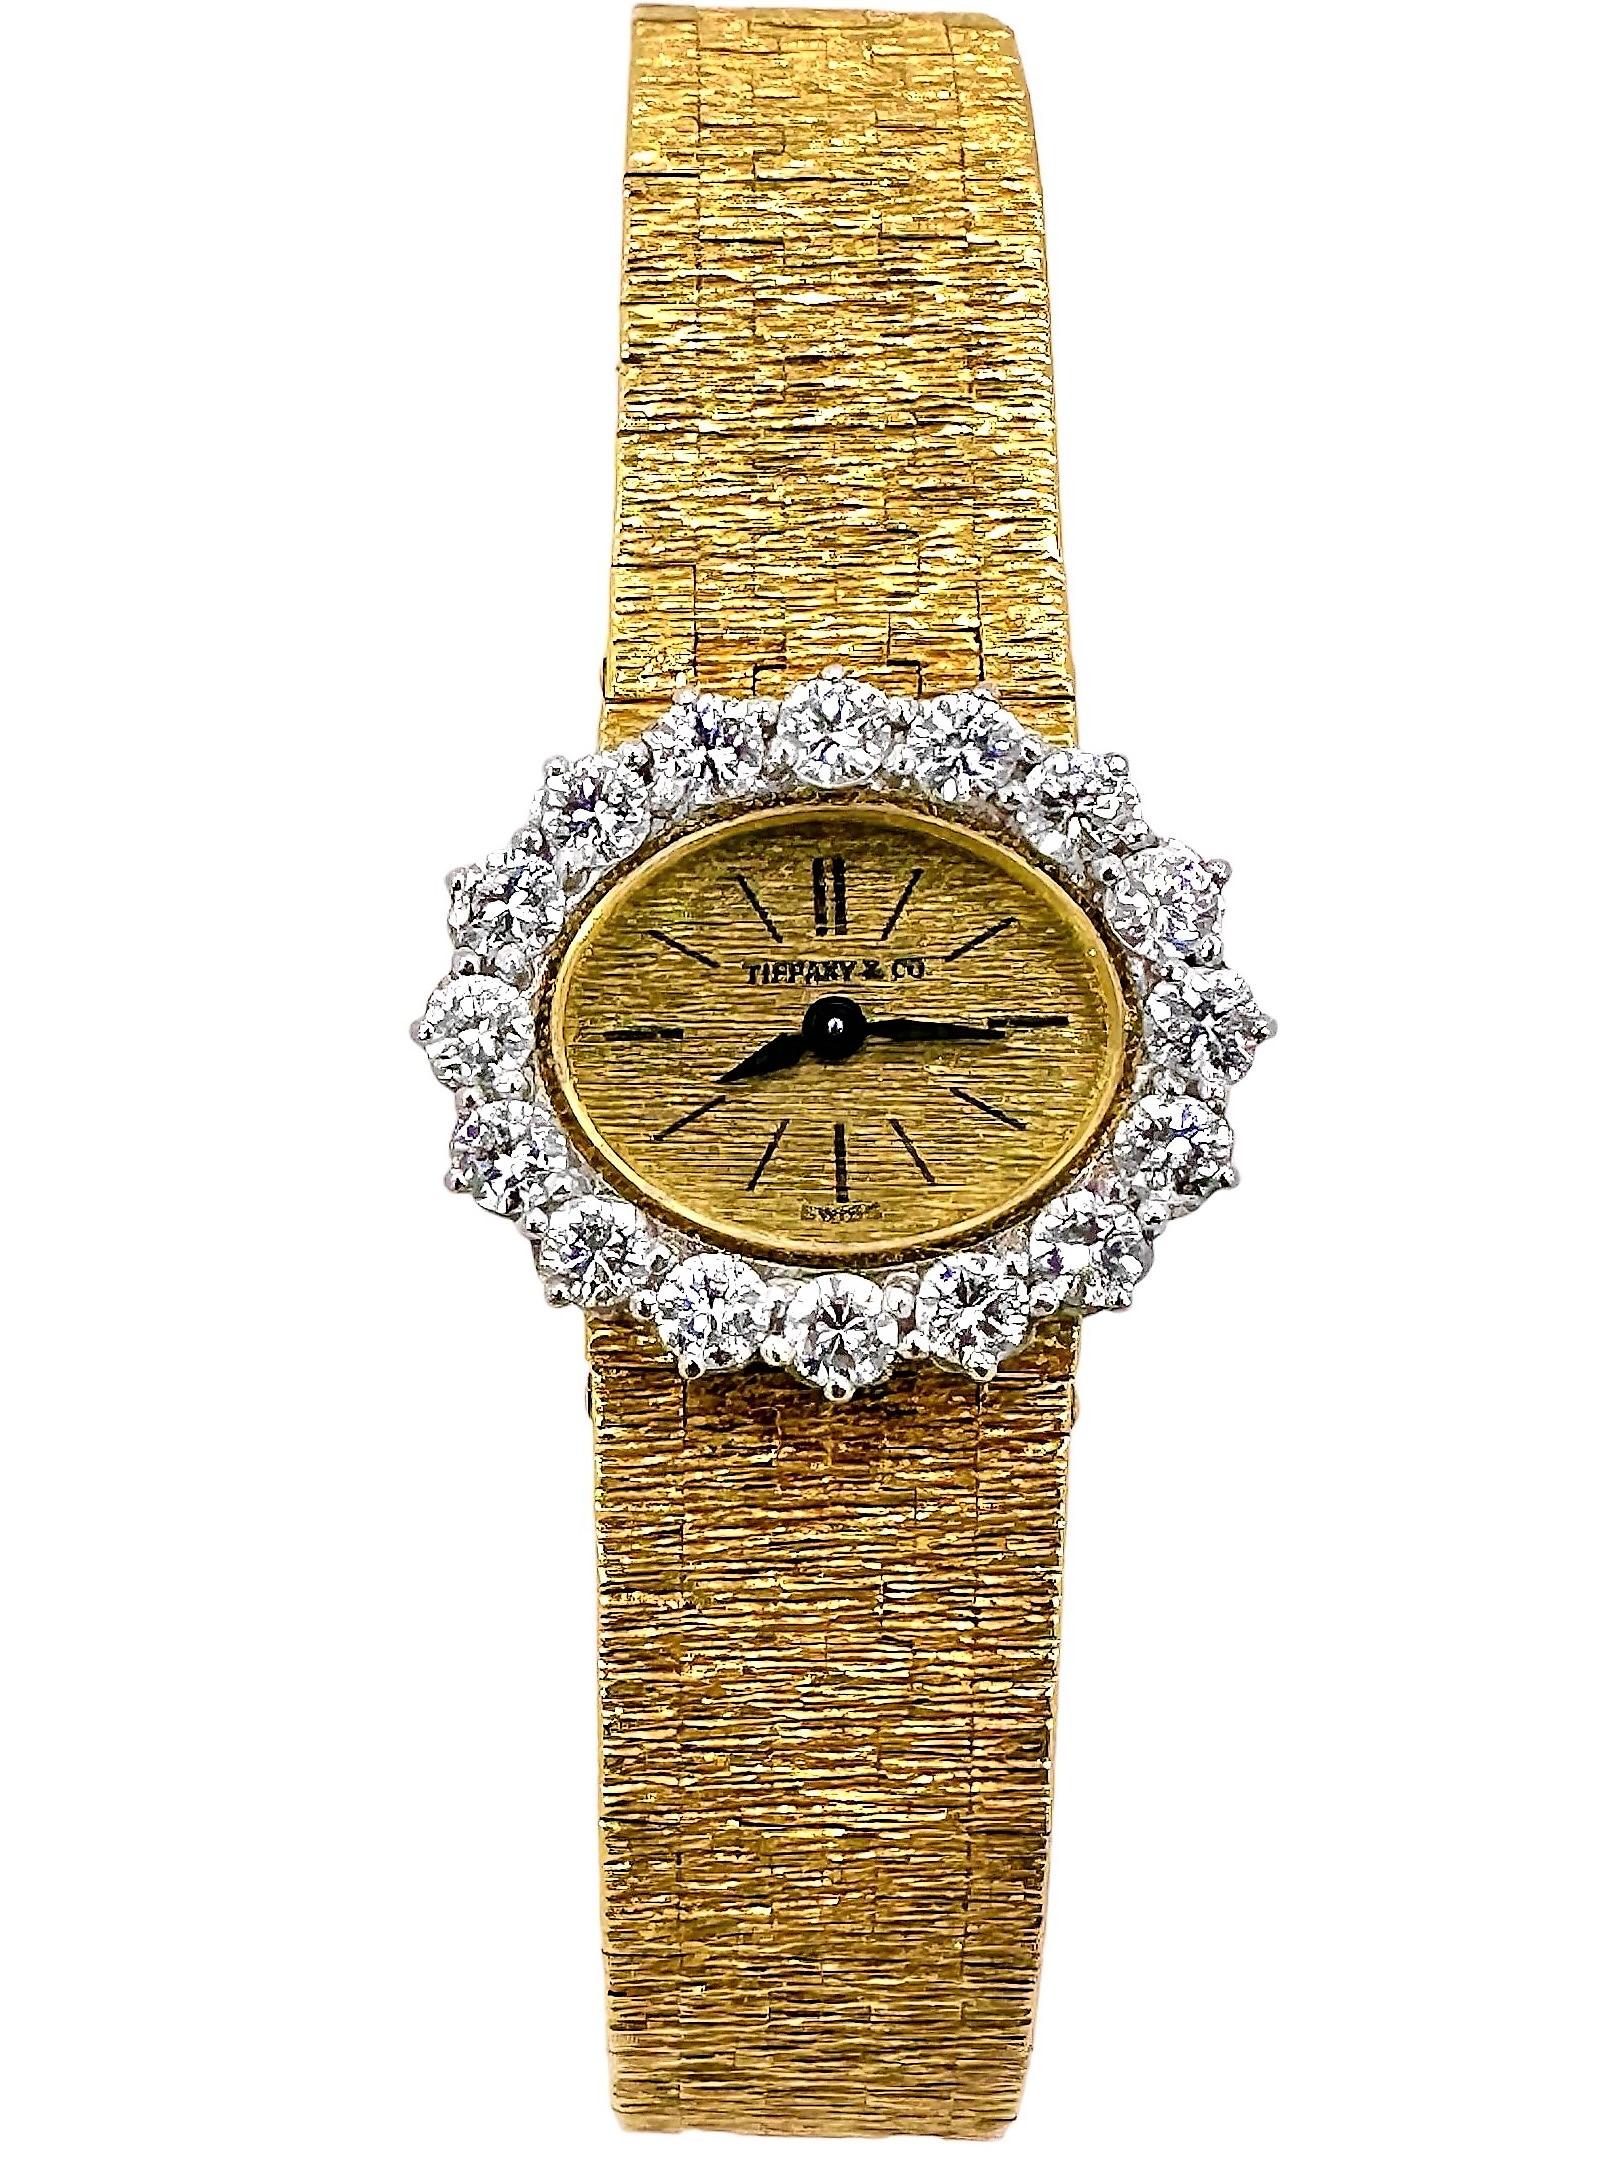 This lovely vintage ladies Petite Size Piaget wrist watch was designed and created in Geneva Switzerland at the world headquarters of this venerated maker. The ticking heart of this superlative time piece is an ultra thin Piaget mechanical, back